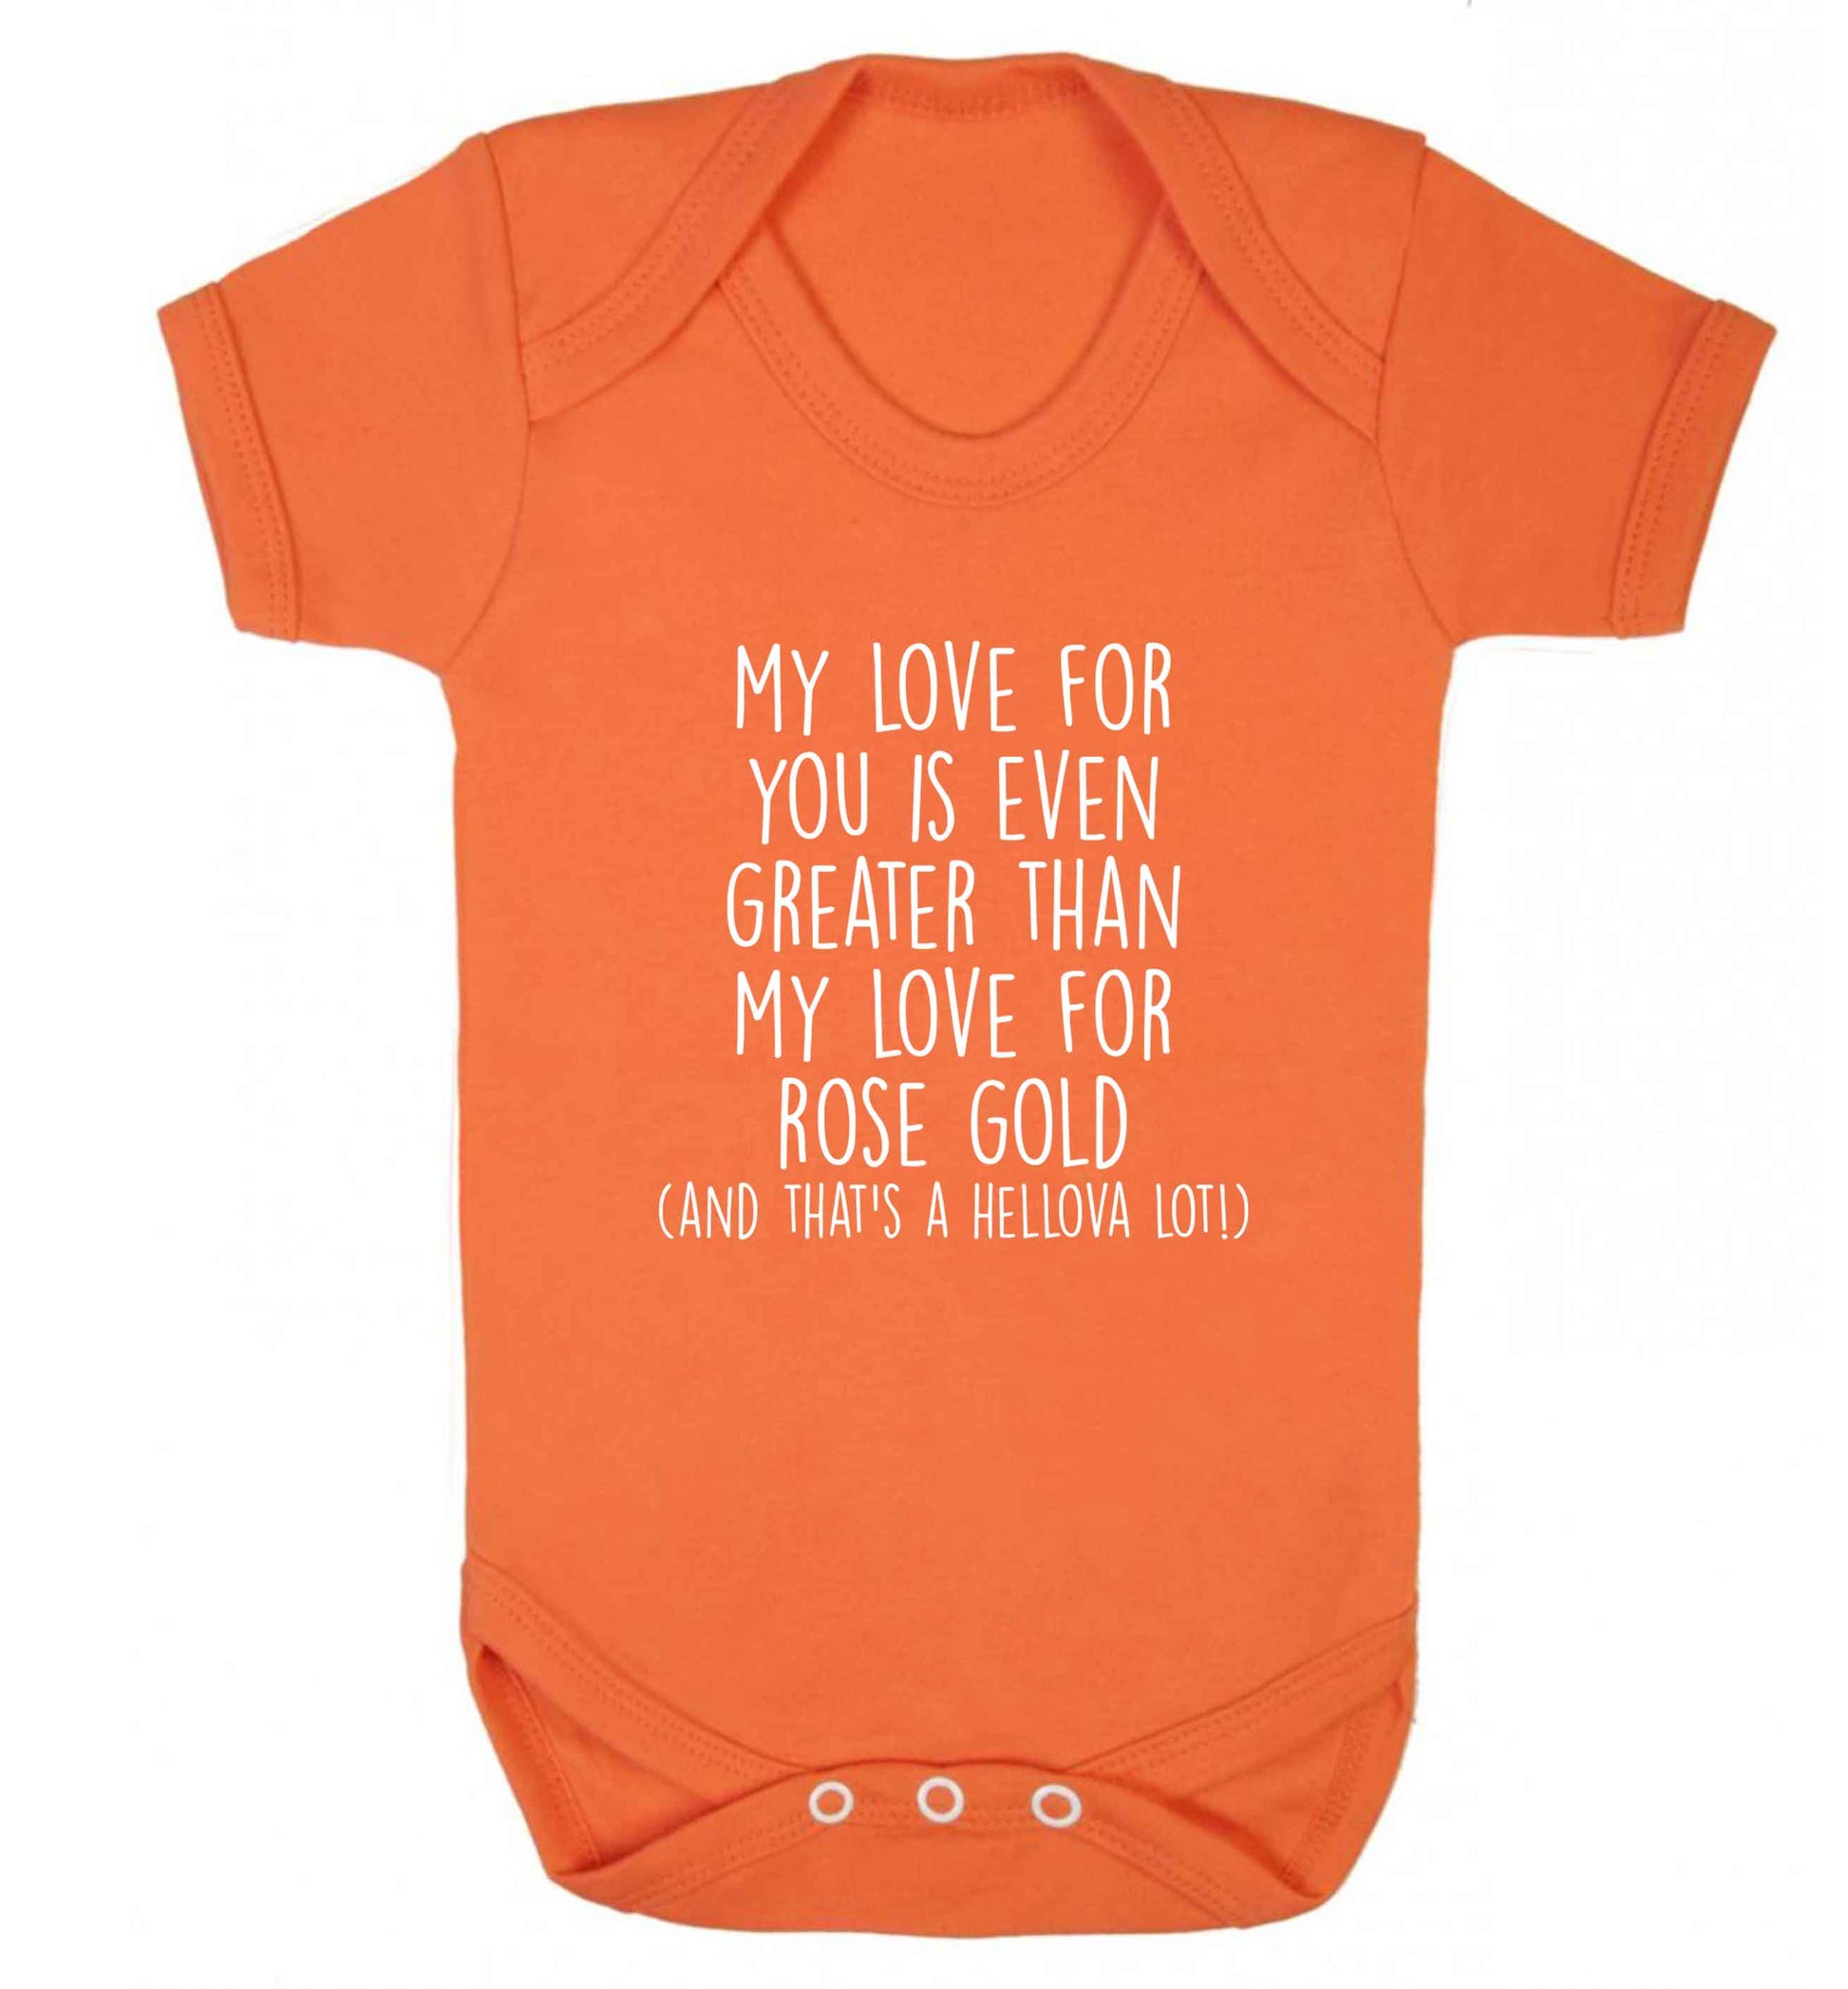 My love for you is even greater than my love for rose gold (and that's a hellova lot) baby vest orange 18-24 months